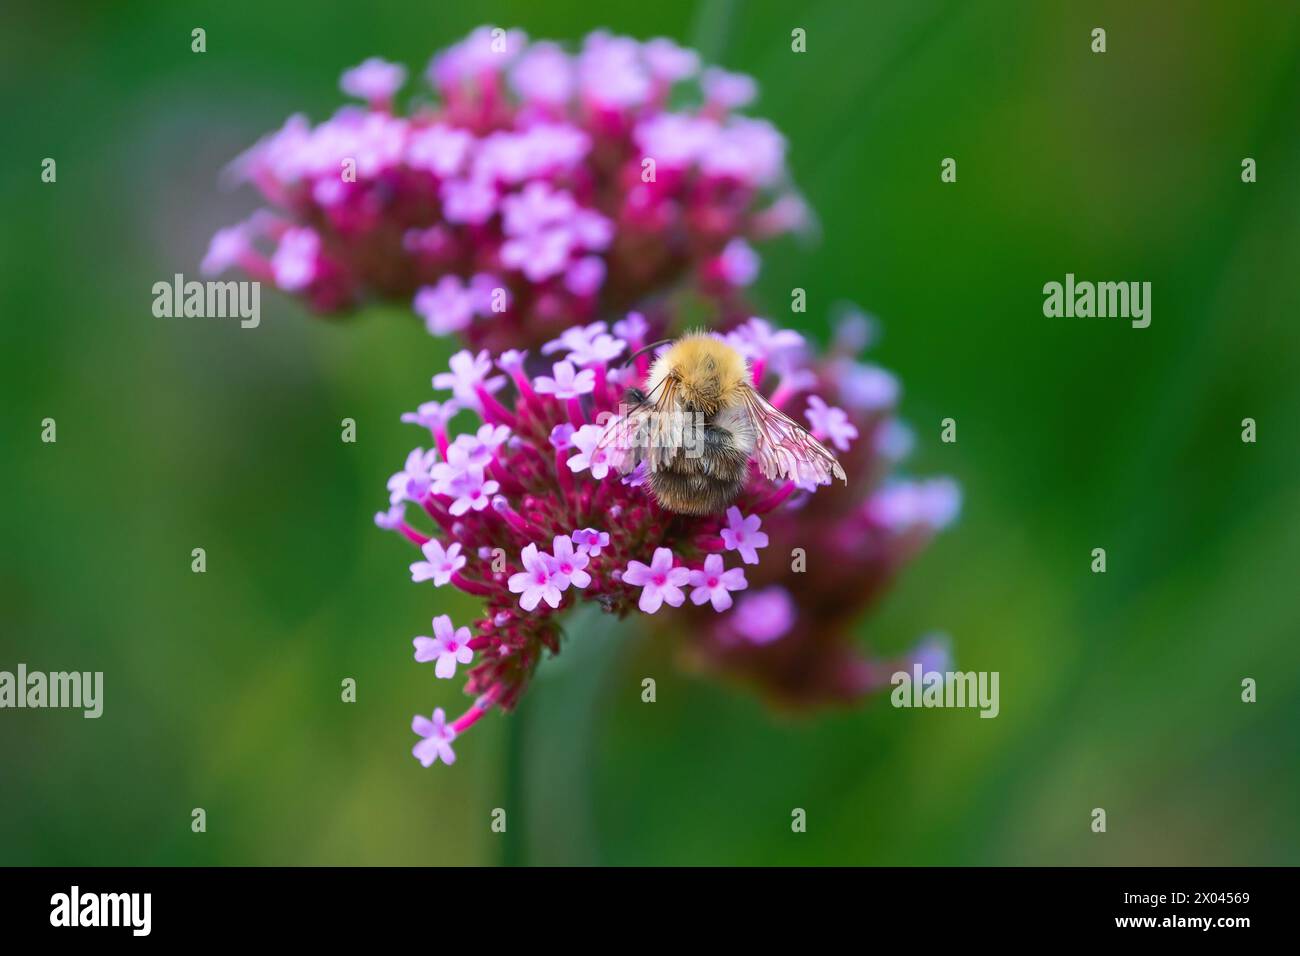 Bumblebee on a verbena flower. Pollination of flowers. Insects in nature. Stock Photo